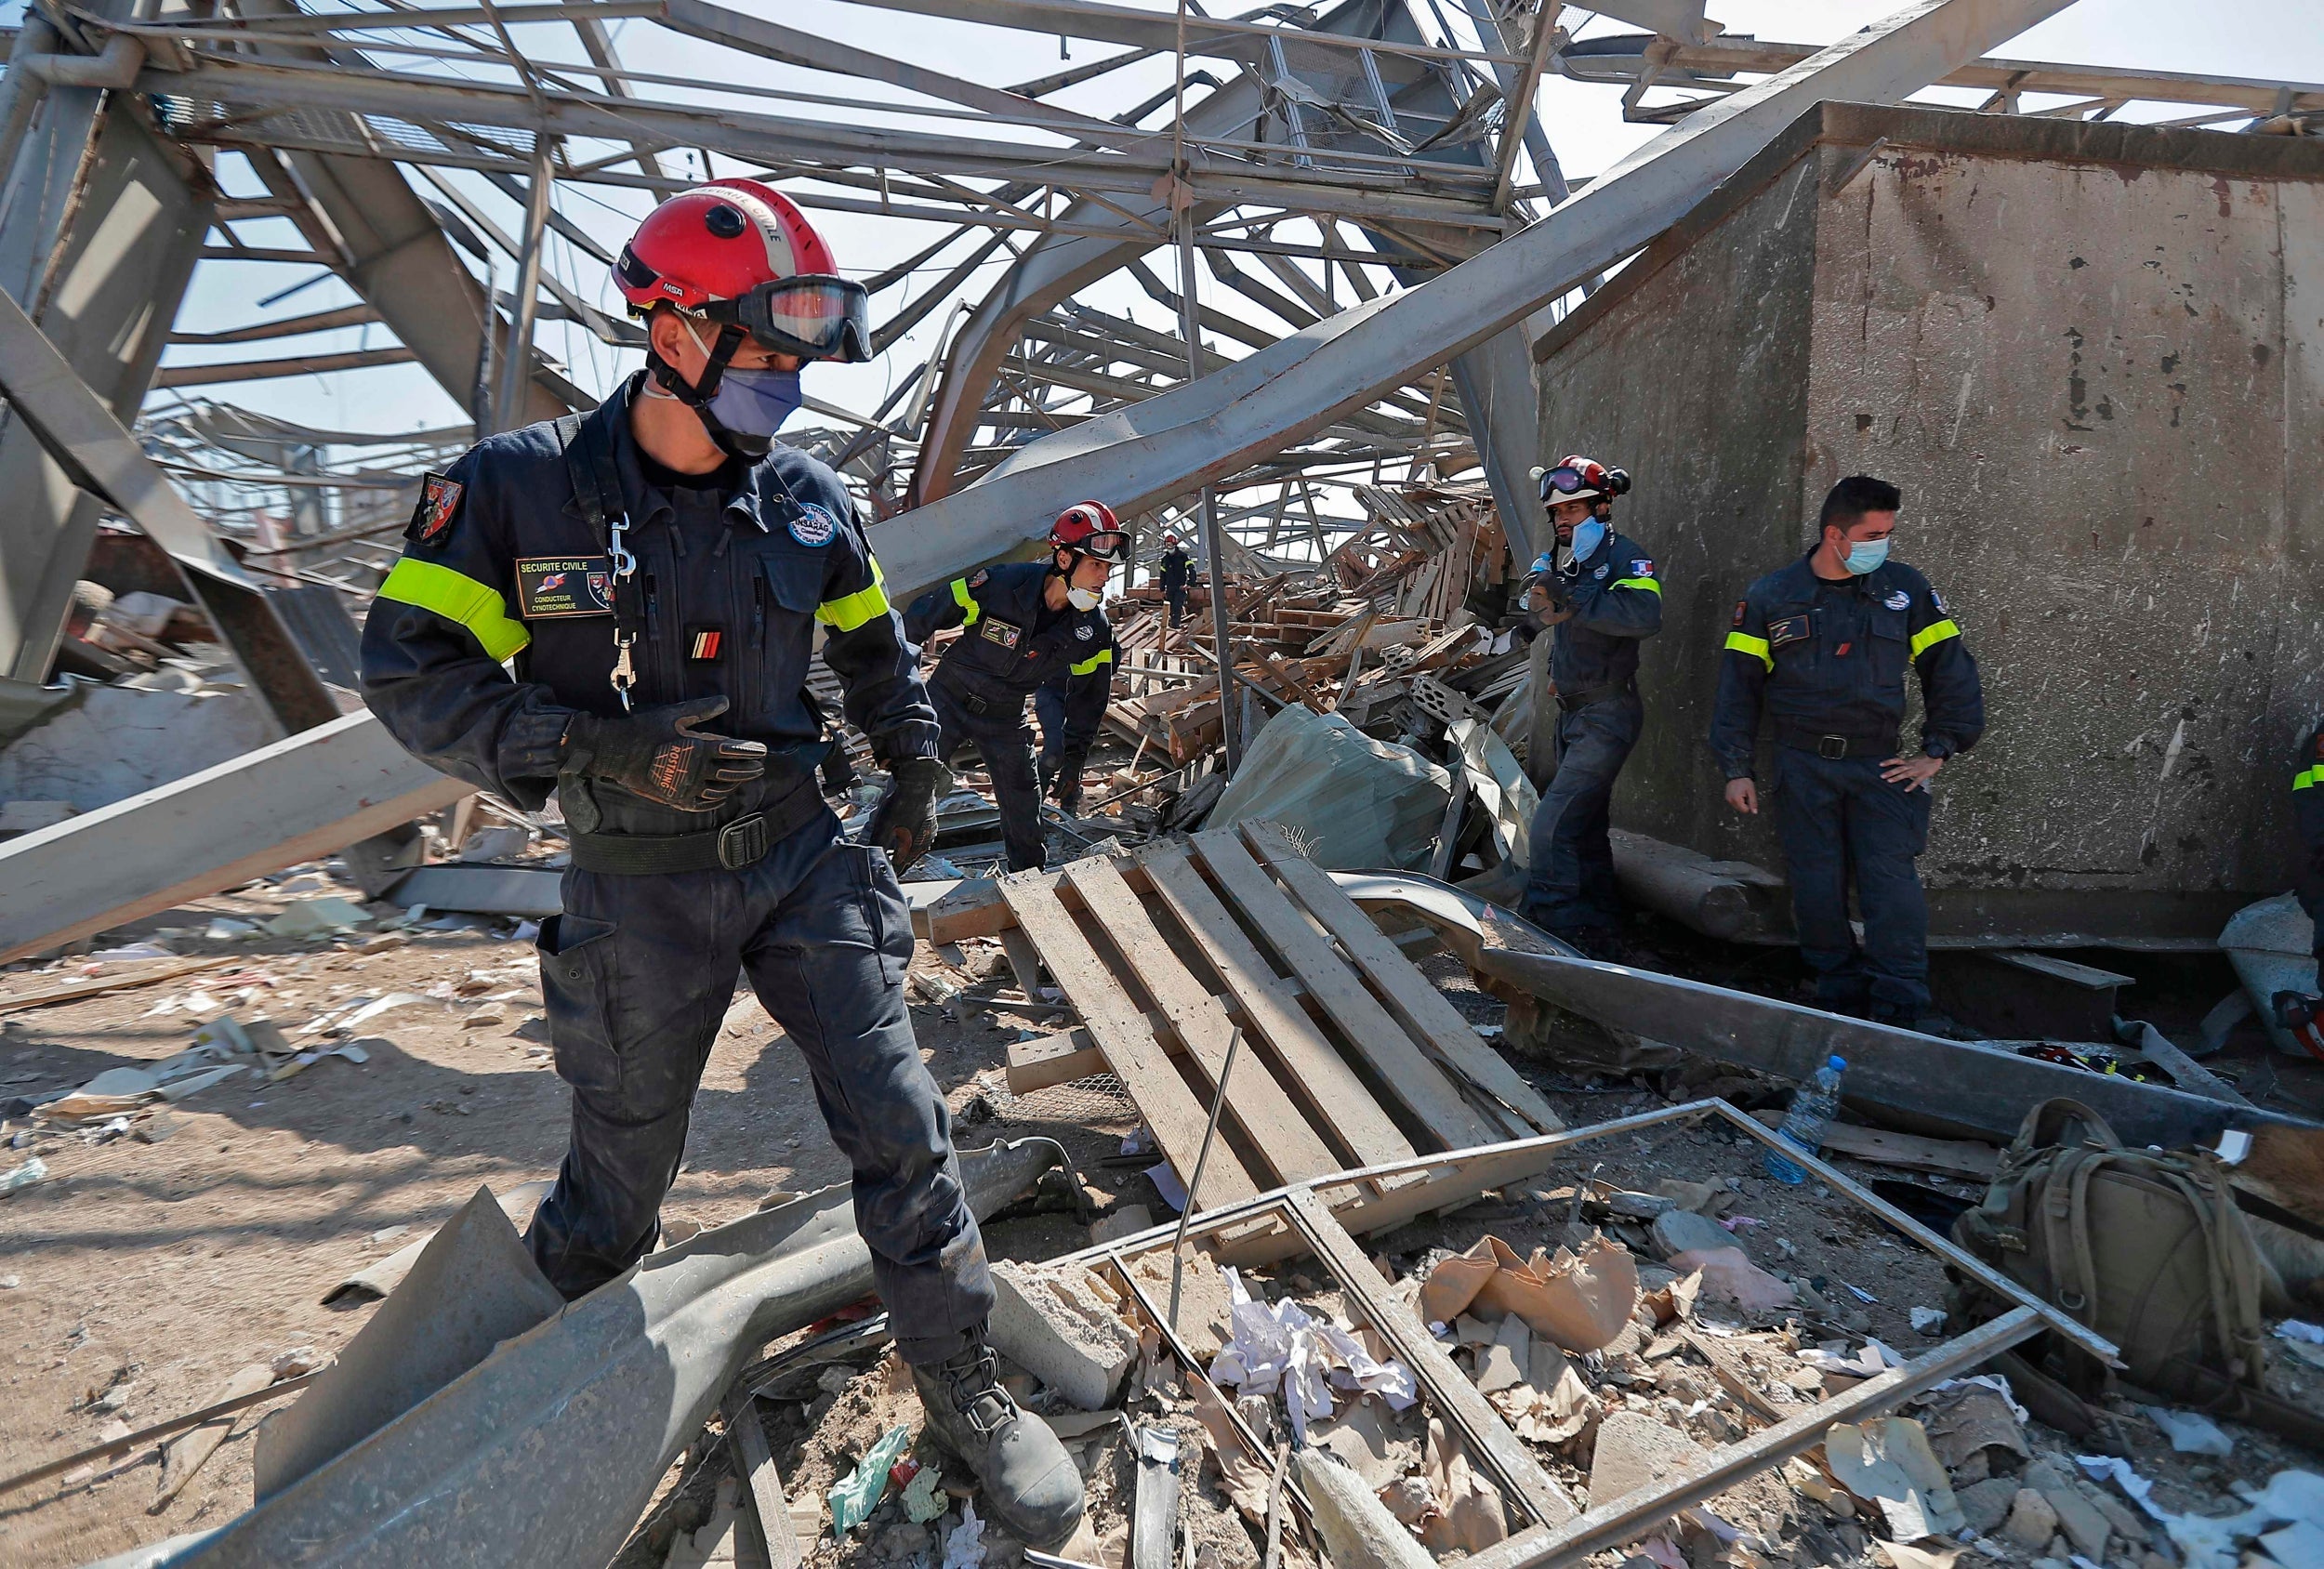 French rescue workers search through the rubble in the devastated Beirut port on Friday